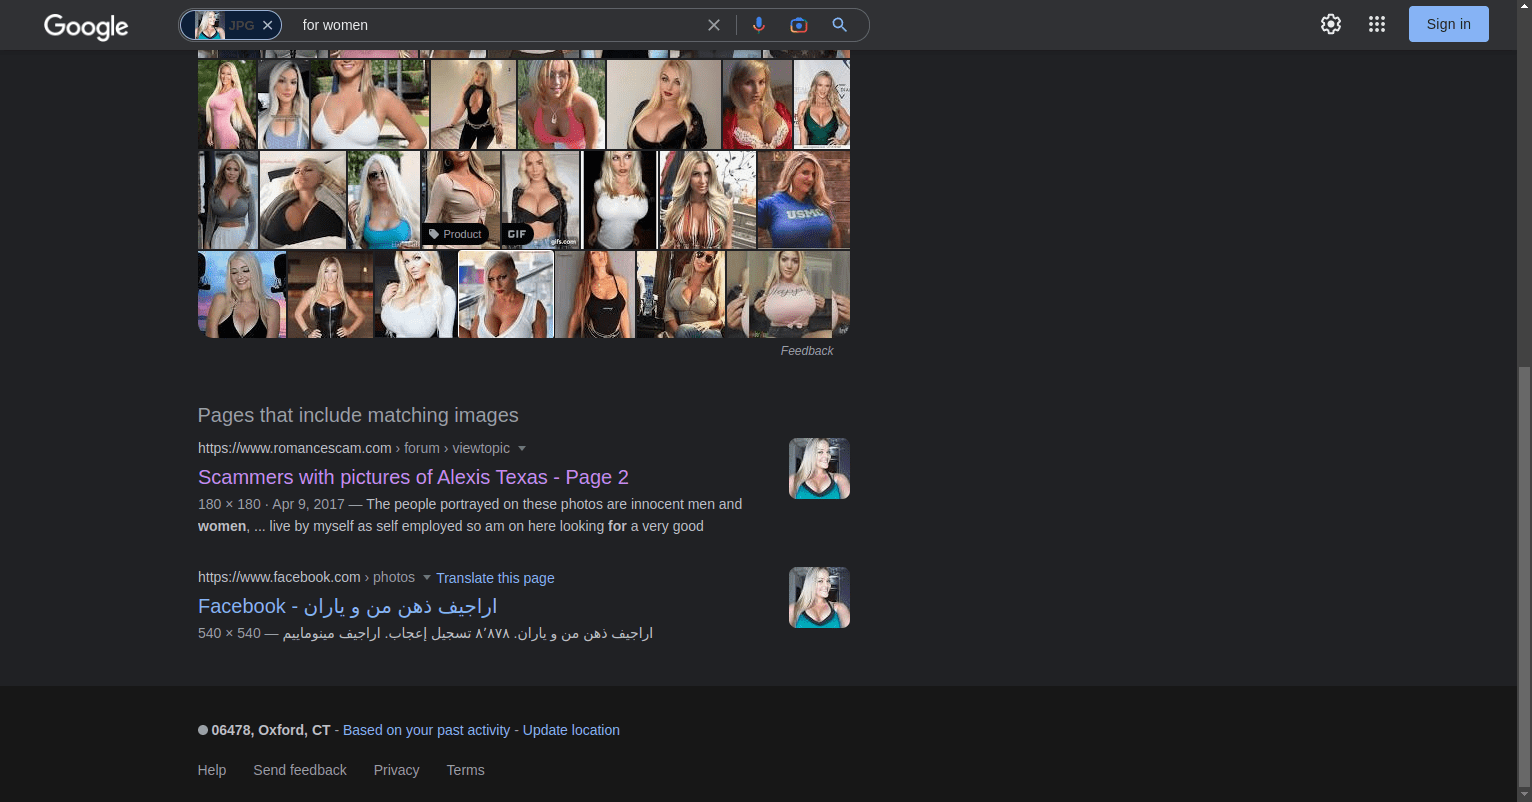 Google Image Search results for profile picture used in fake Facebook page